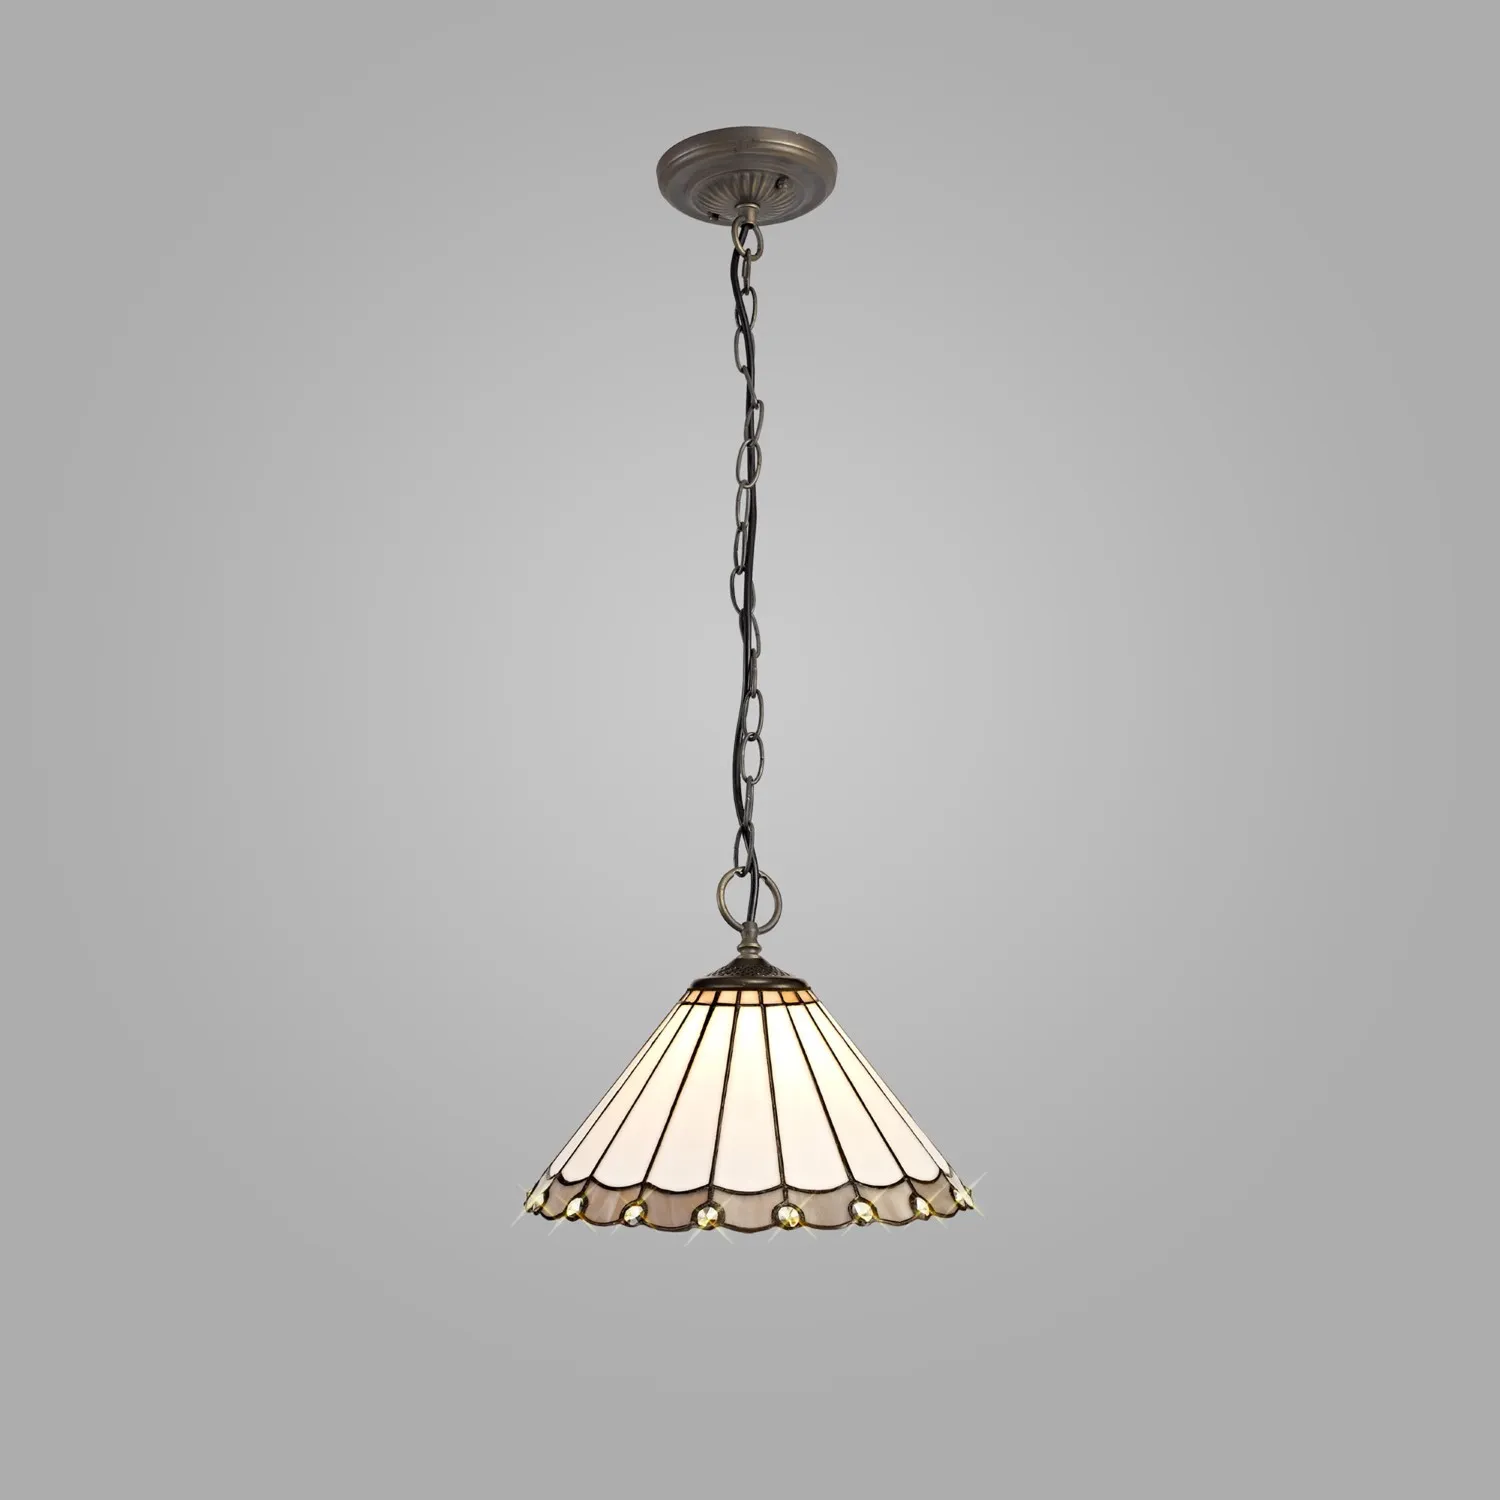 Ware 3 Light Downlighter Pendant E27 With 30cm Tiffany Shade, Grey Cream Crystal Aged Antique Brass